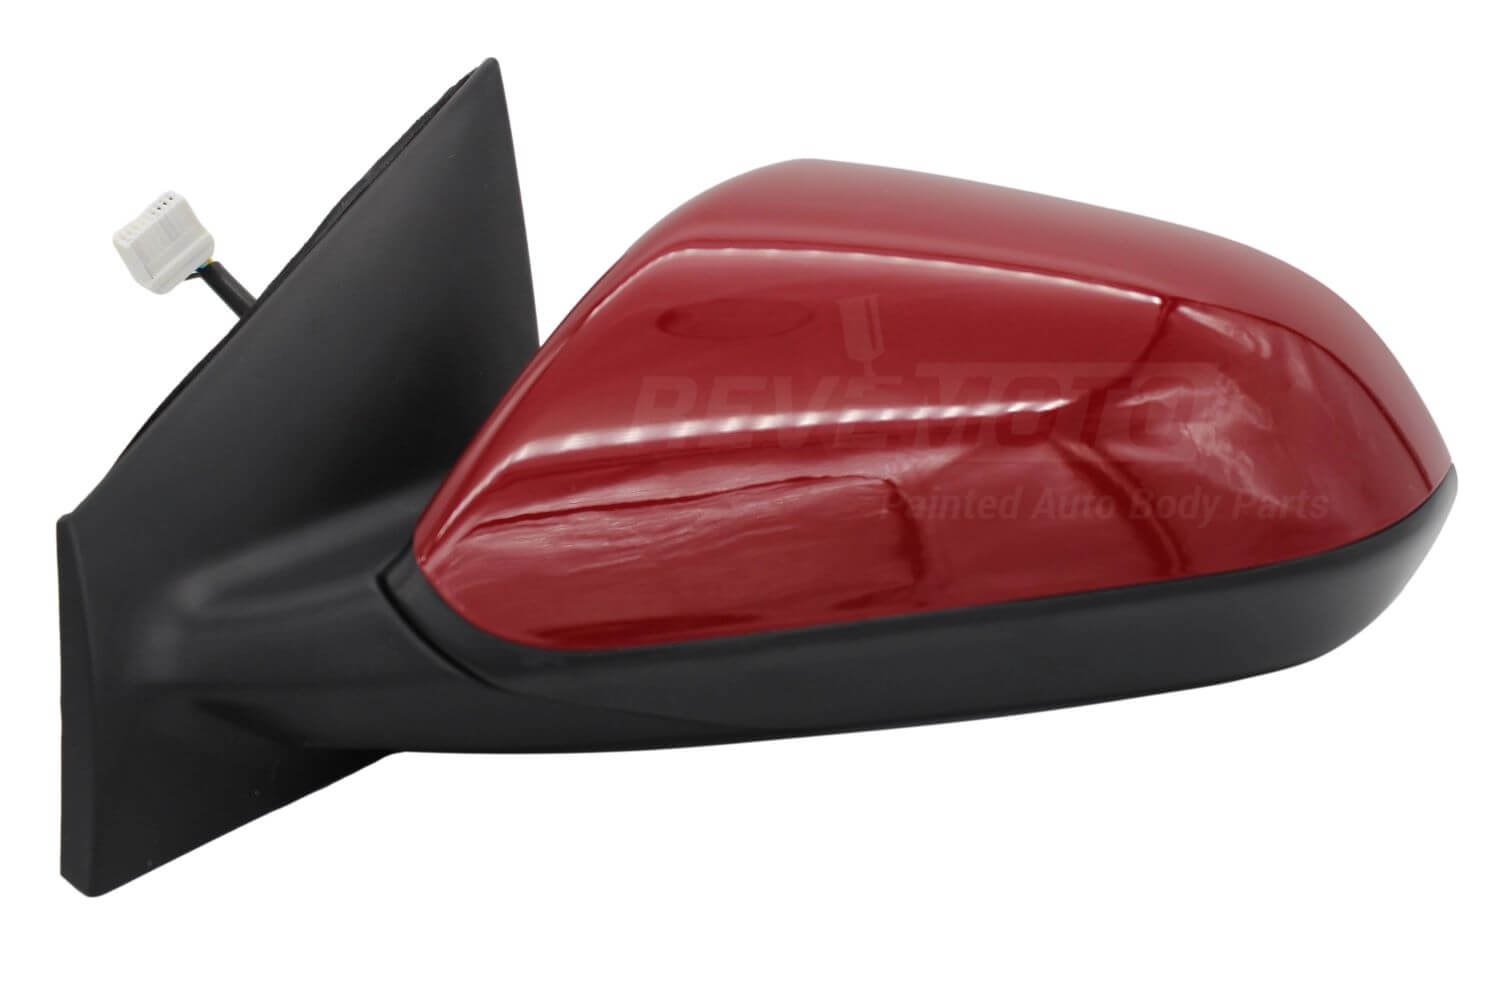 2019 Hyundai Sonata Driver Side View Mirror Painted Scarlet Red Pearl (PR, PR3) - With Power, Manual Folding, Blind Spot Detection